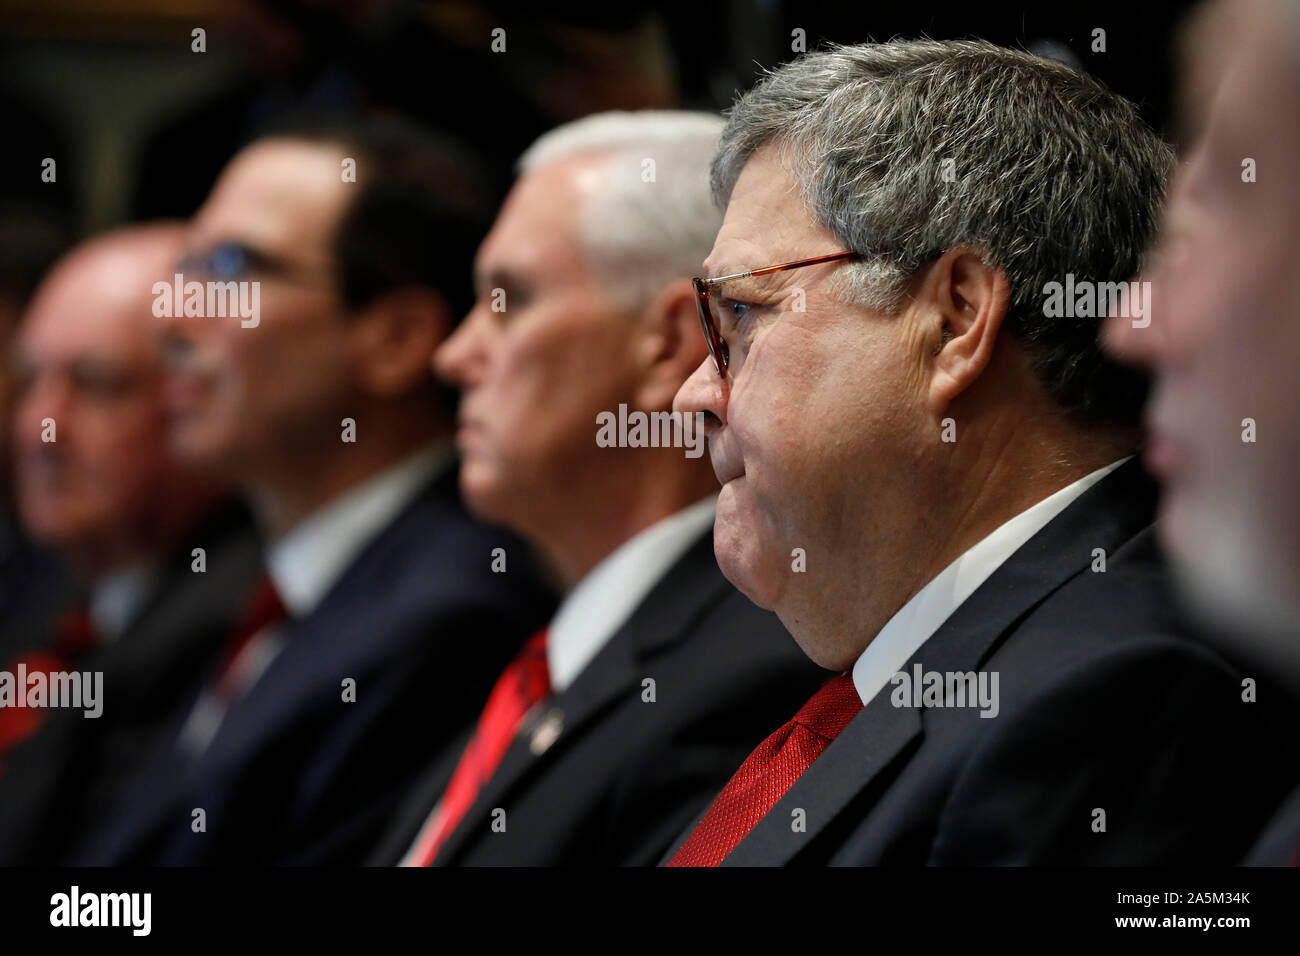 Washington, United States Of America. 21st Oct, 2019. United States Attorney General William P. Barr attends a Cabinet Meeting at the White House in Washington, DC on October 21, 2019. Credit: Yuri Gripas/Pool via CNP | usage worldwide Credit: dpa/Alamy Live News Stock Photo